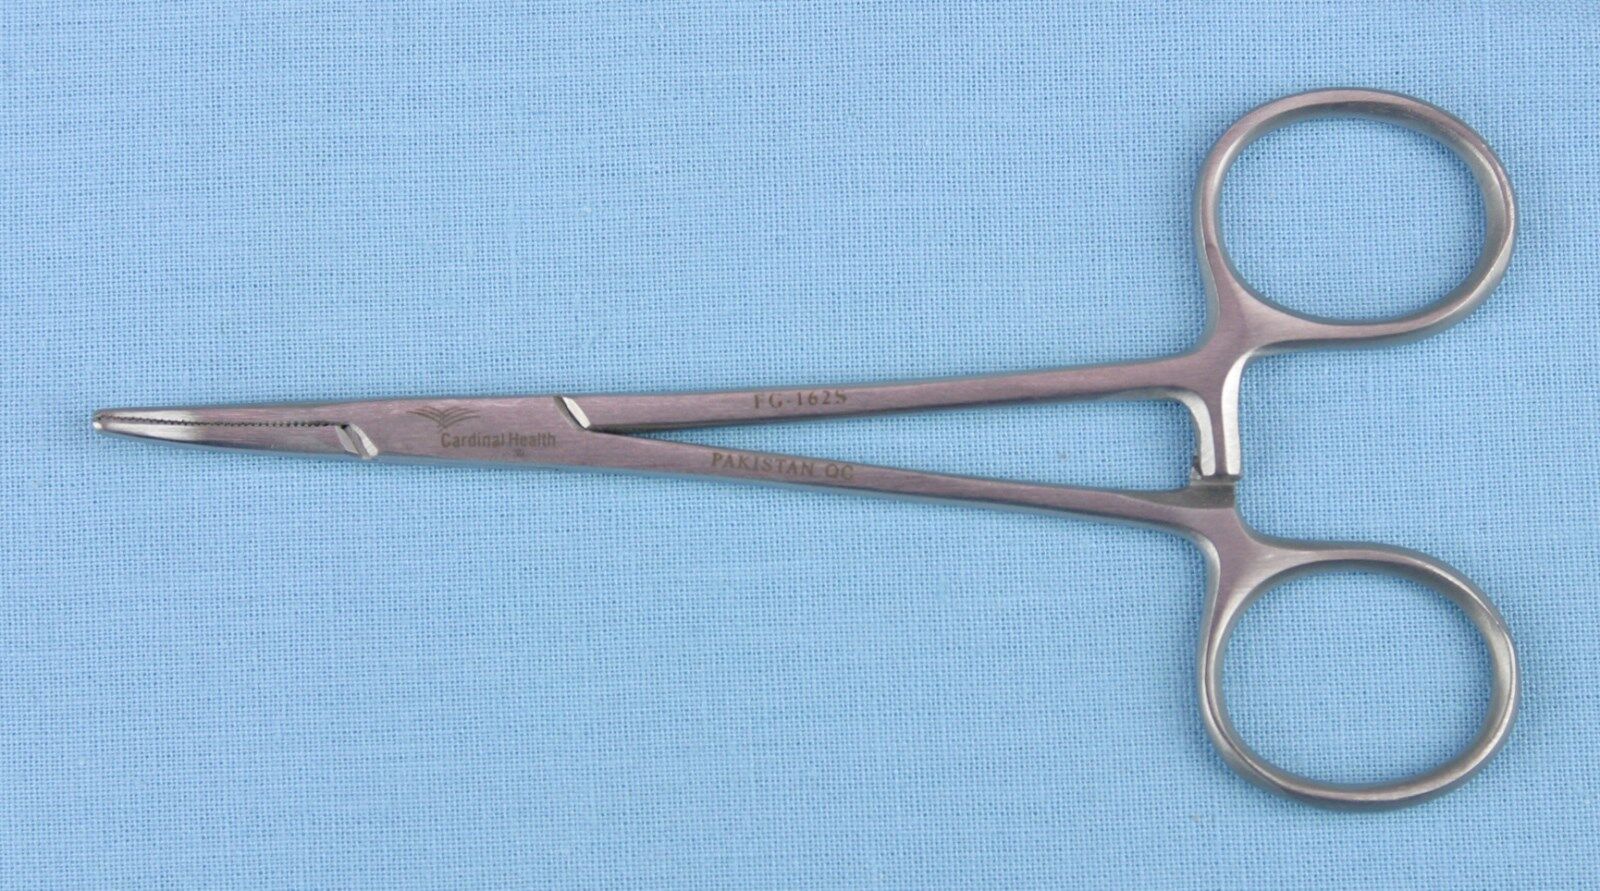 HALSTEAD MOSQUITO FORCEPS CURVED 5